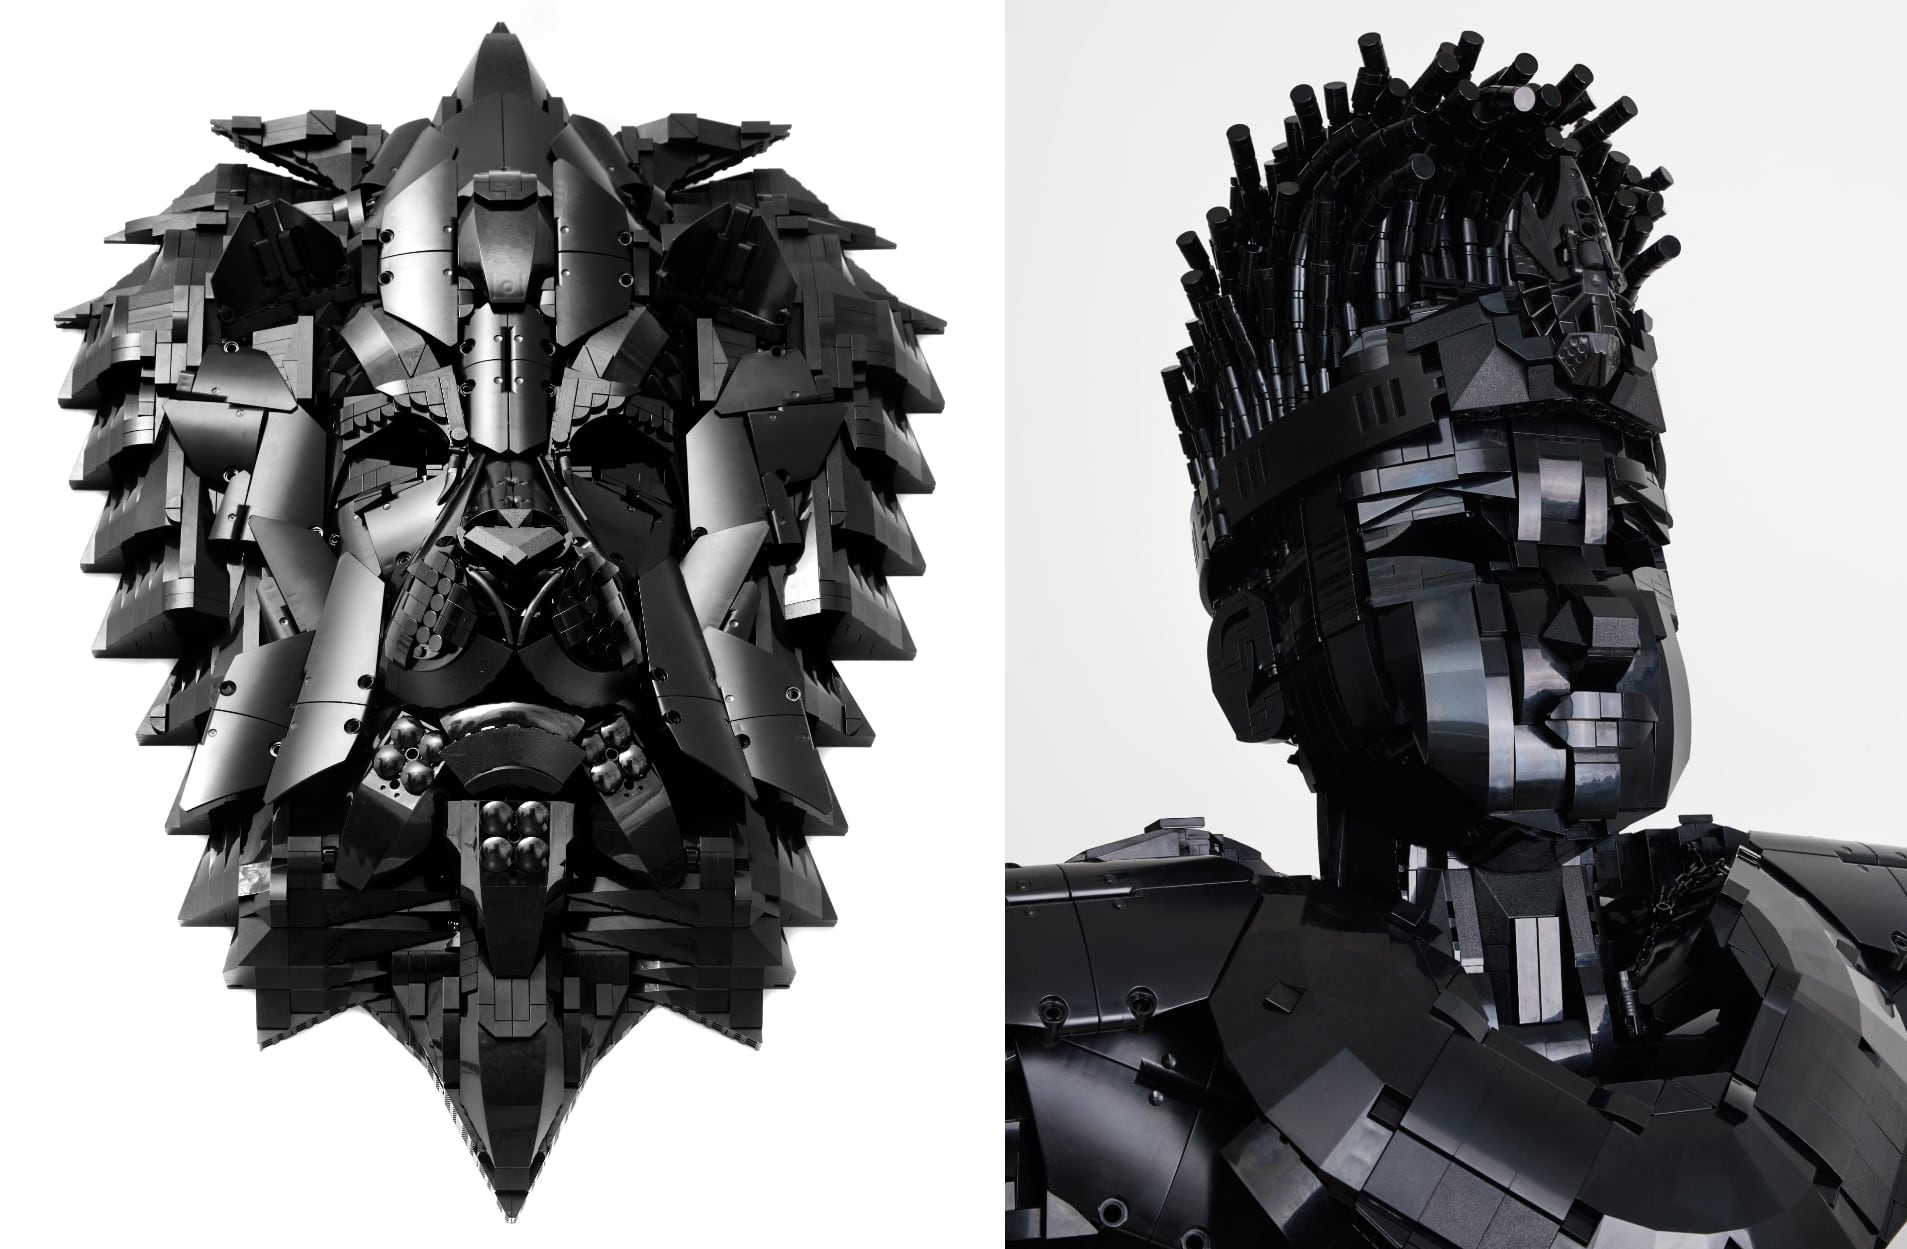 Two photos of a animalistic mask made of black LEGO and a figure made of black LEGO